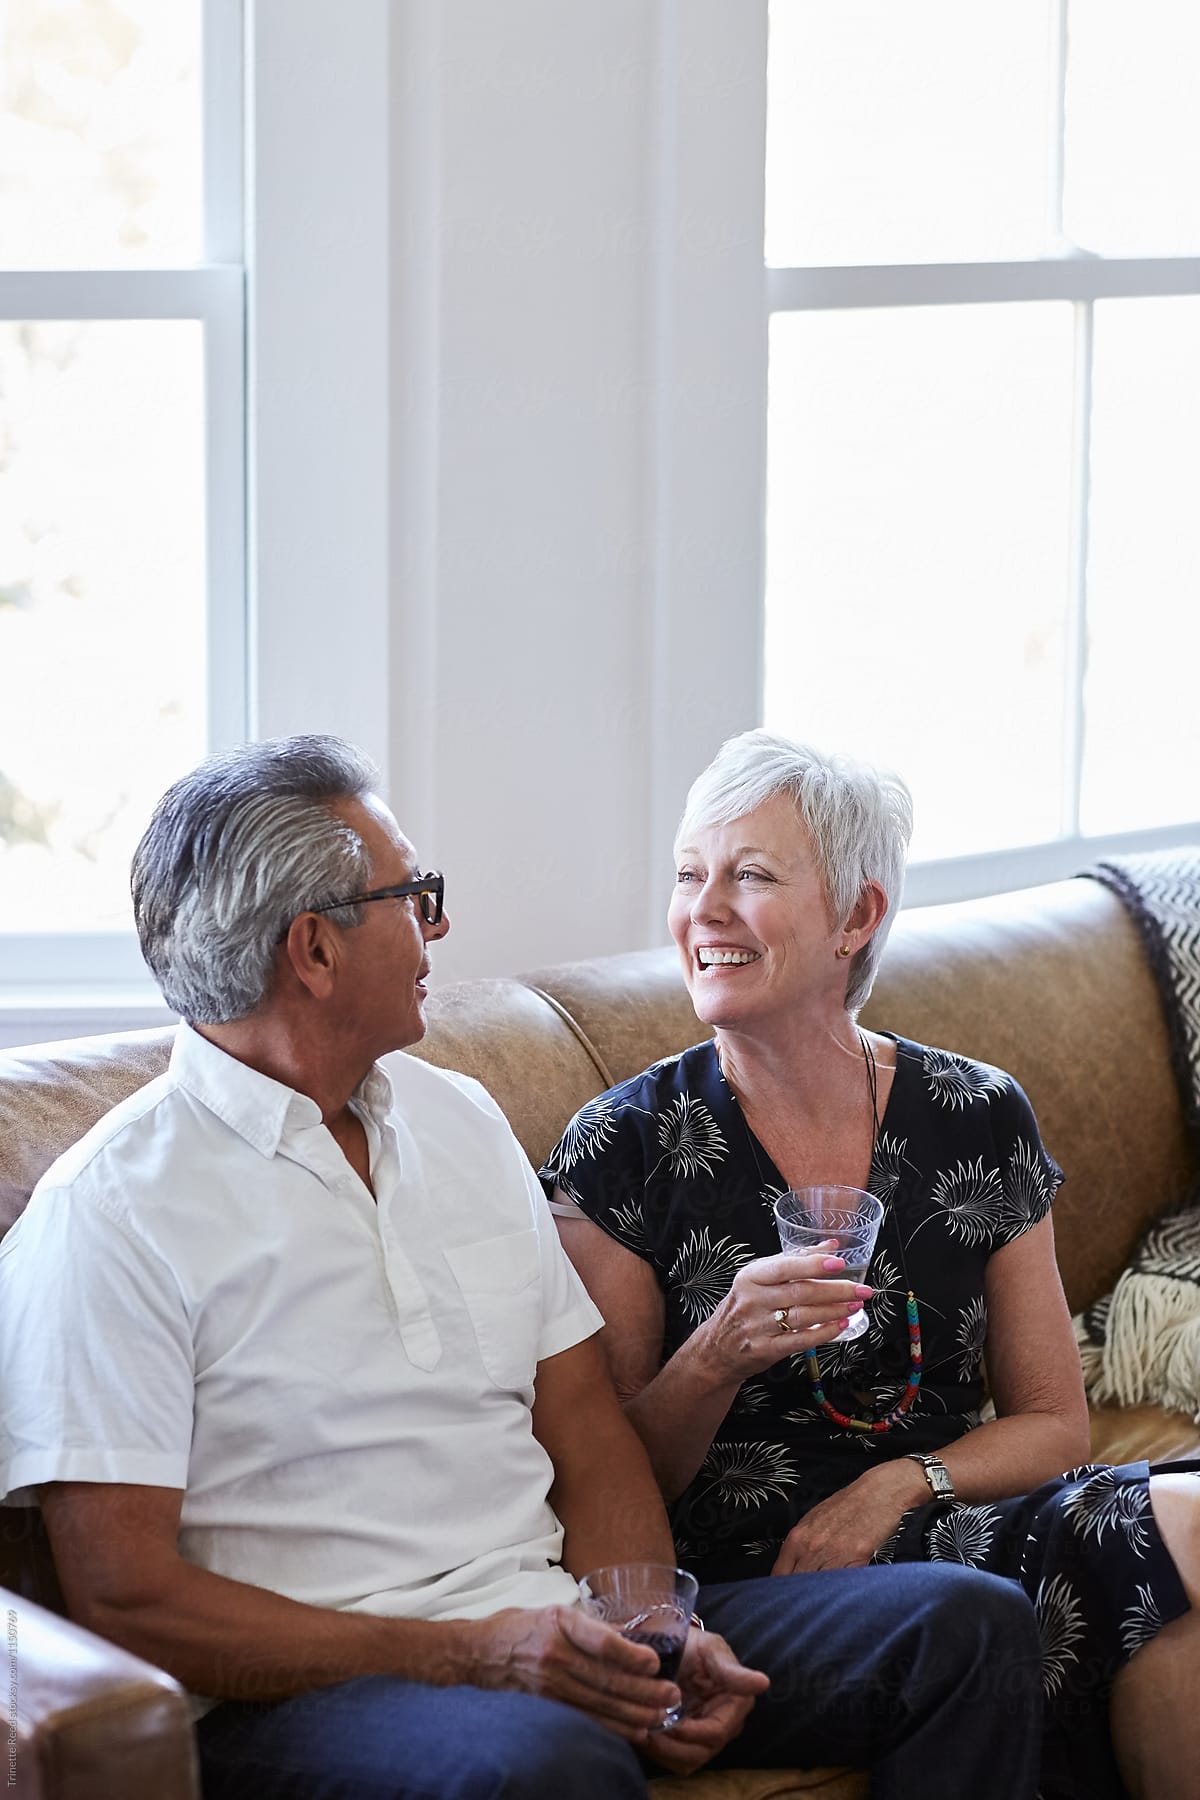 Senior couple talking at a party in living room